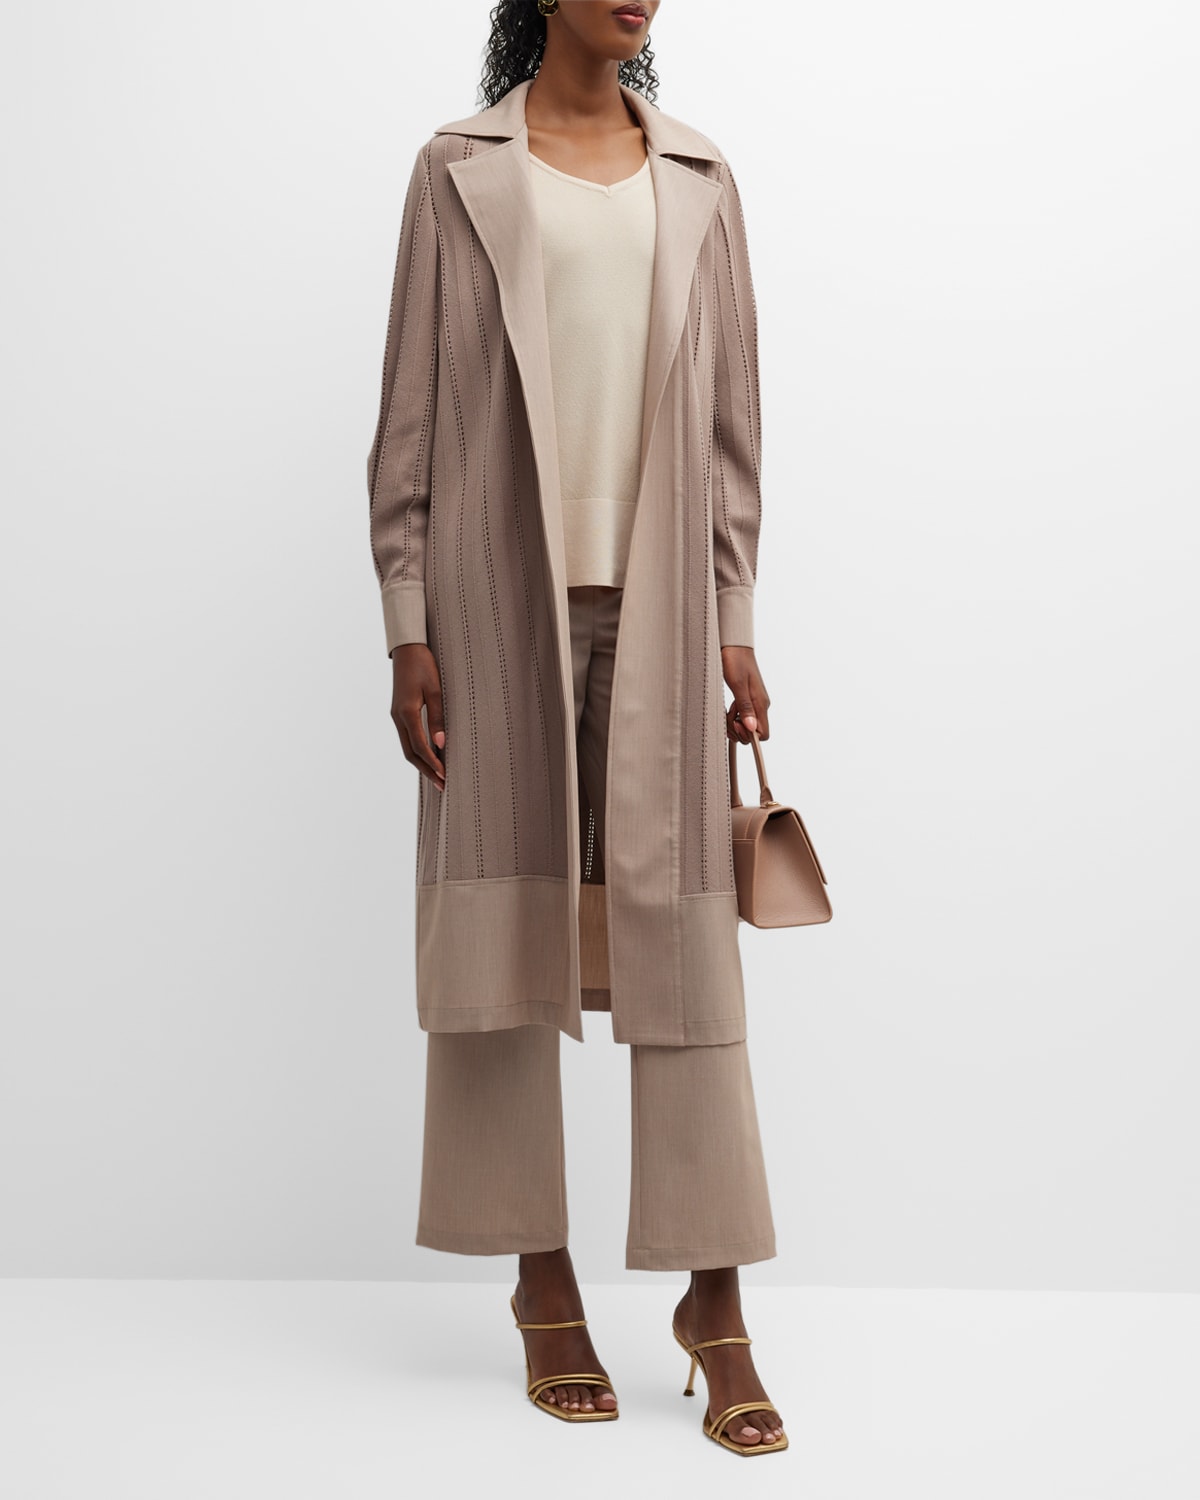 MISOOK SHEER KNIT DUSTER WITH TWILL TRIM